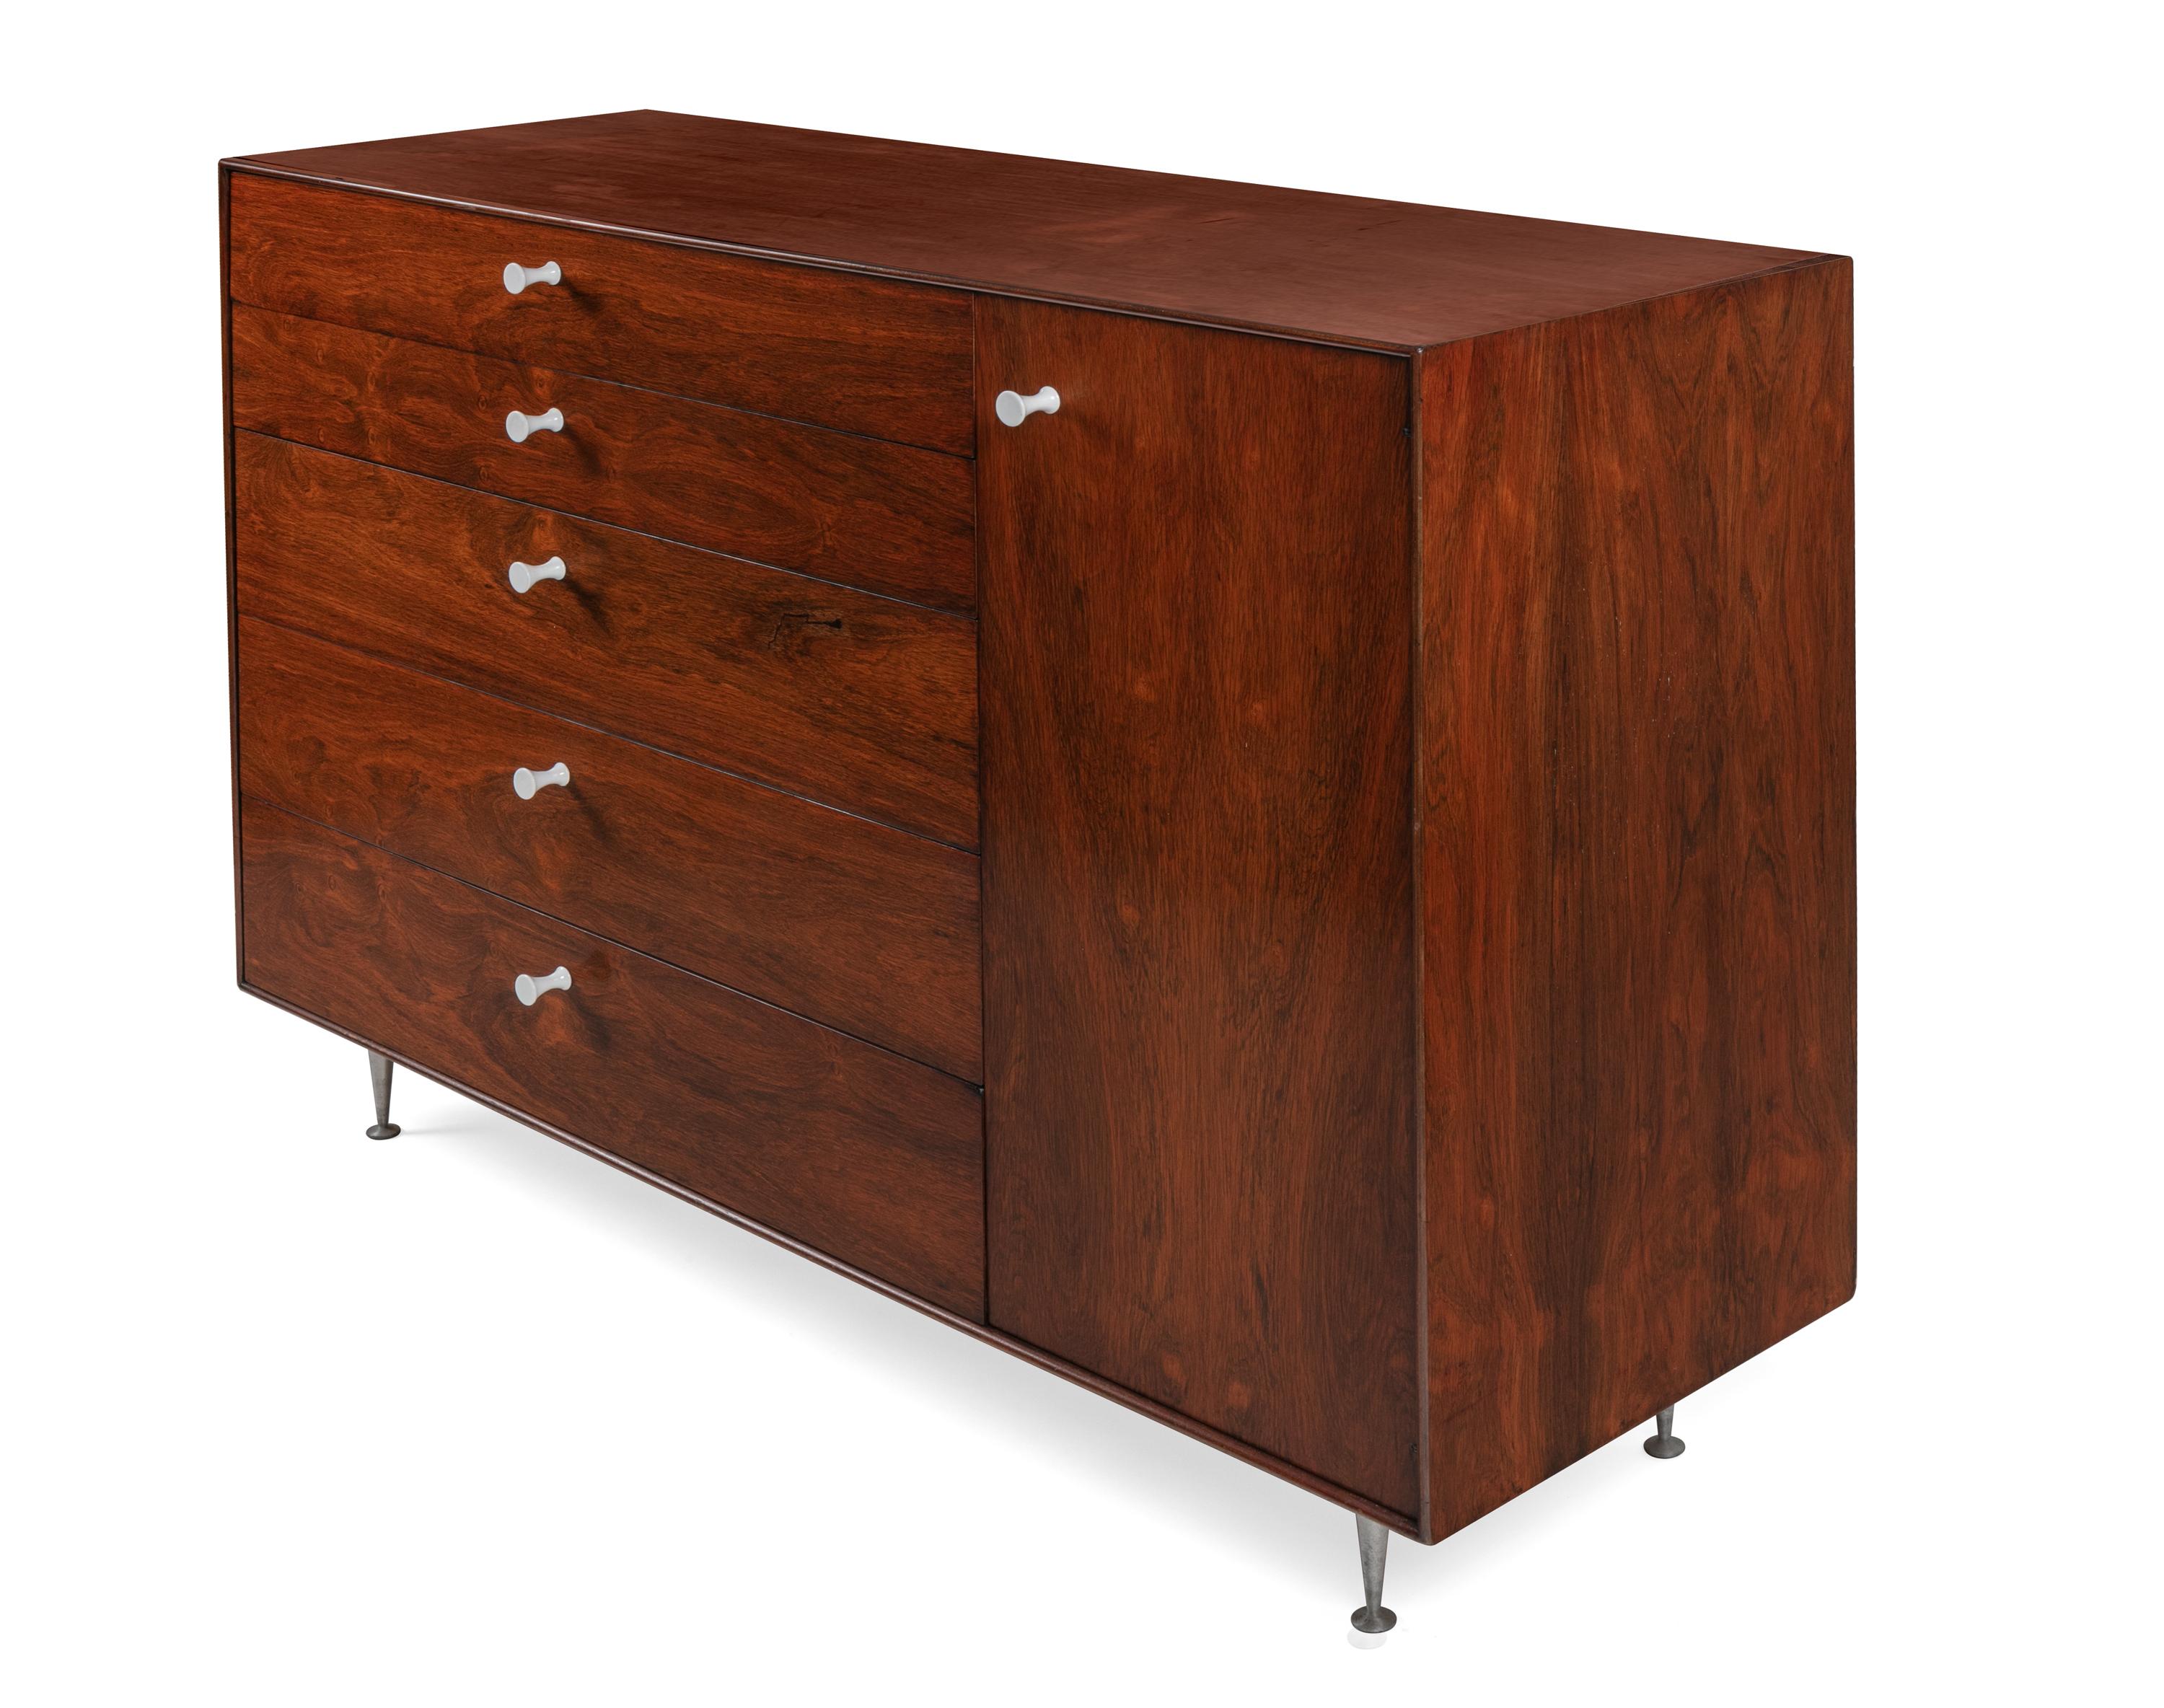 An outstanding piece of the highly desirable Thin edge line of furniture. The quality of the rosewood is magnificent and the storage possibilities are excellent.